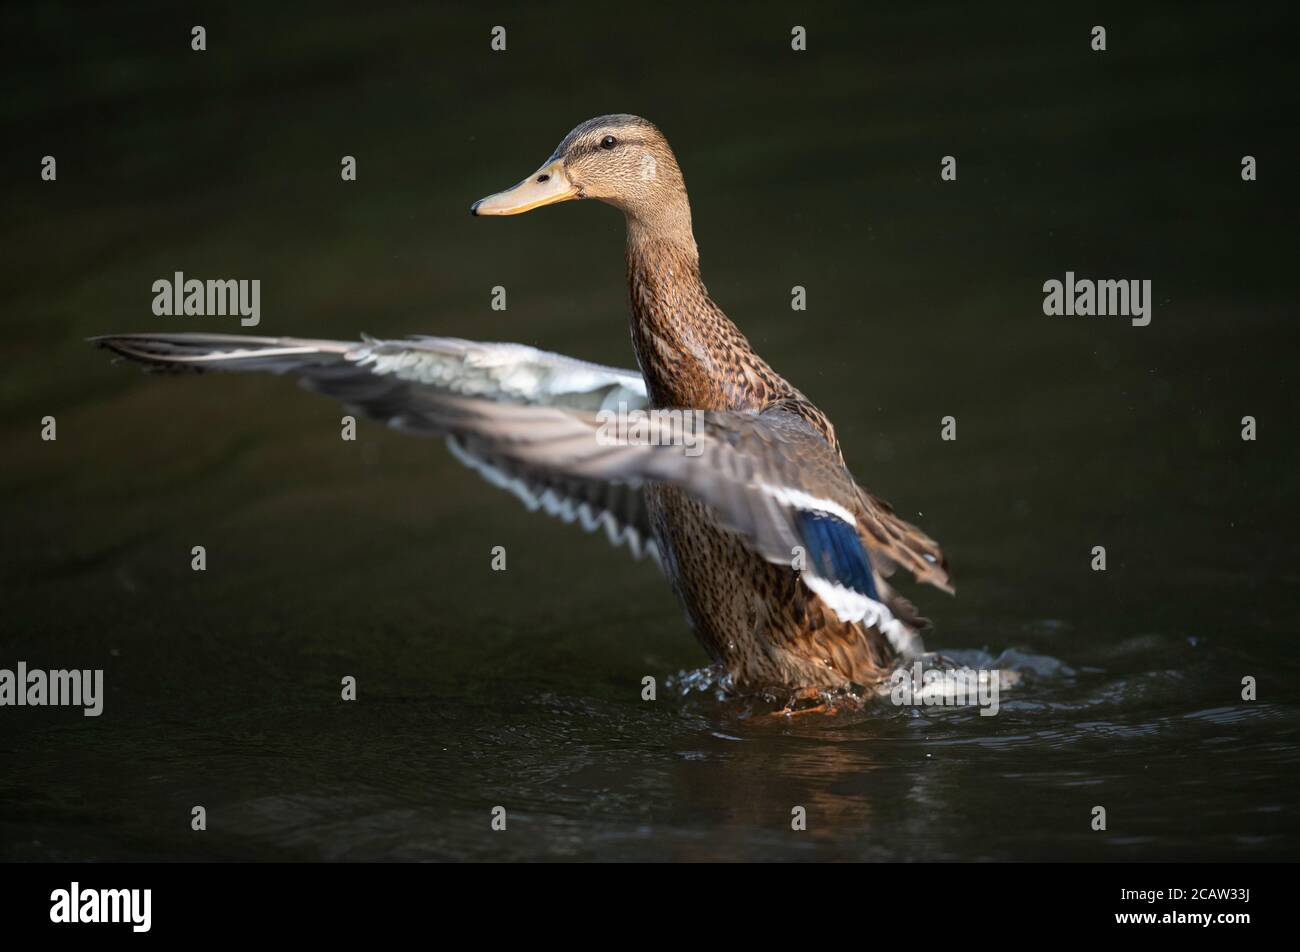 Stockport, UK. 9th August 2020. A mallard hen lands on the water in Bramhall Park as temperatures are expected to reach above 30 degrees centigrade in parts of the UK. © Russell Hart/Alamy Live News. Stock Photo